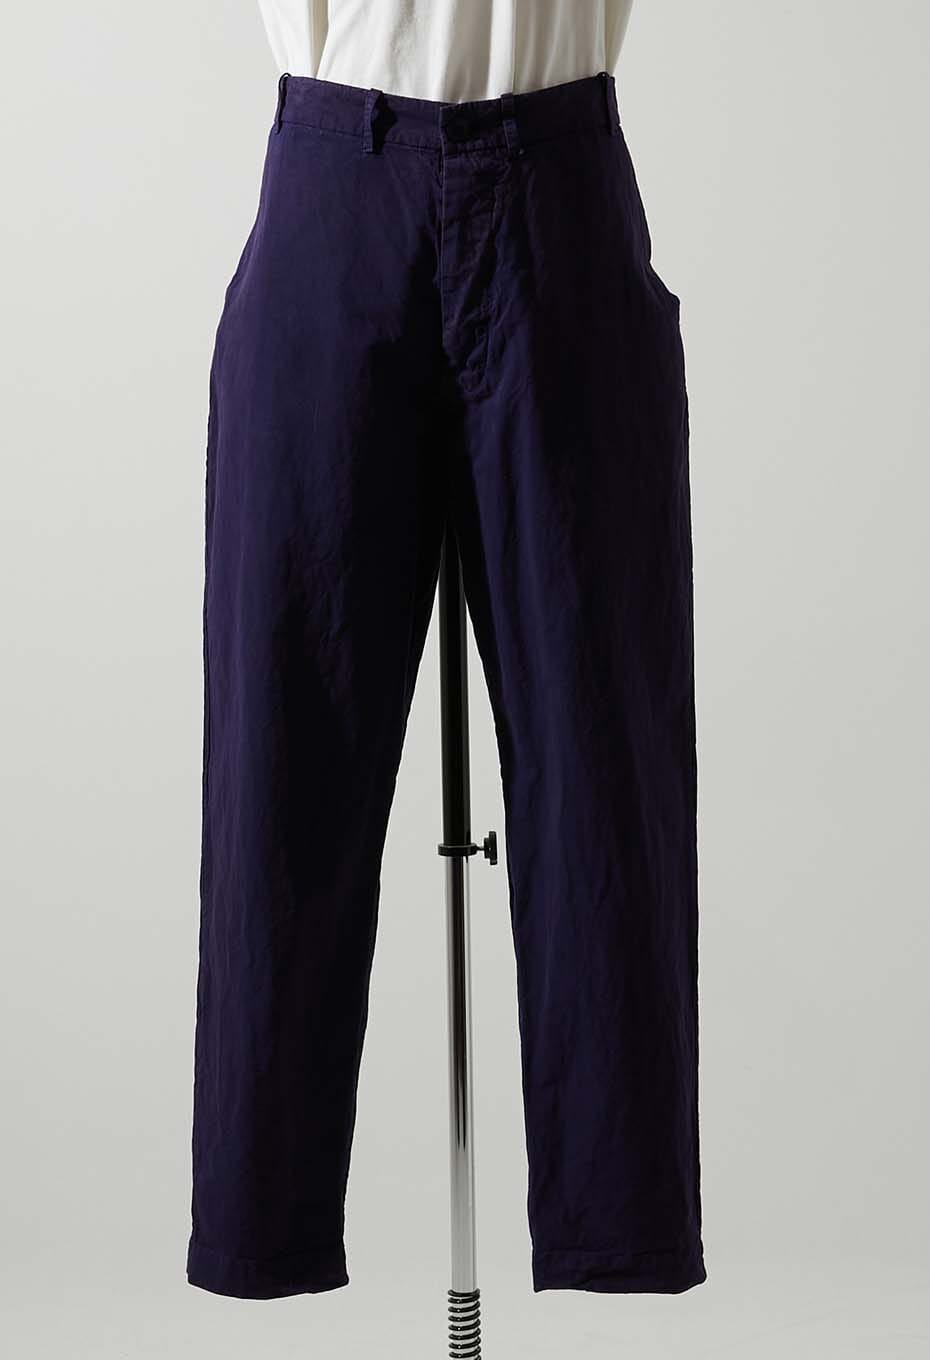 CASEY CASEY DOUBLE DYED AH PANT /DOUBLE DYED STH0004